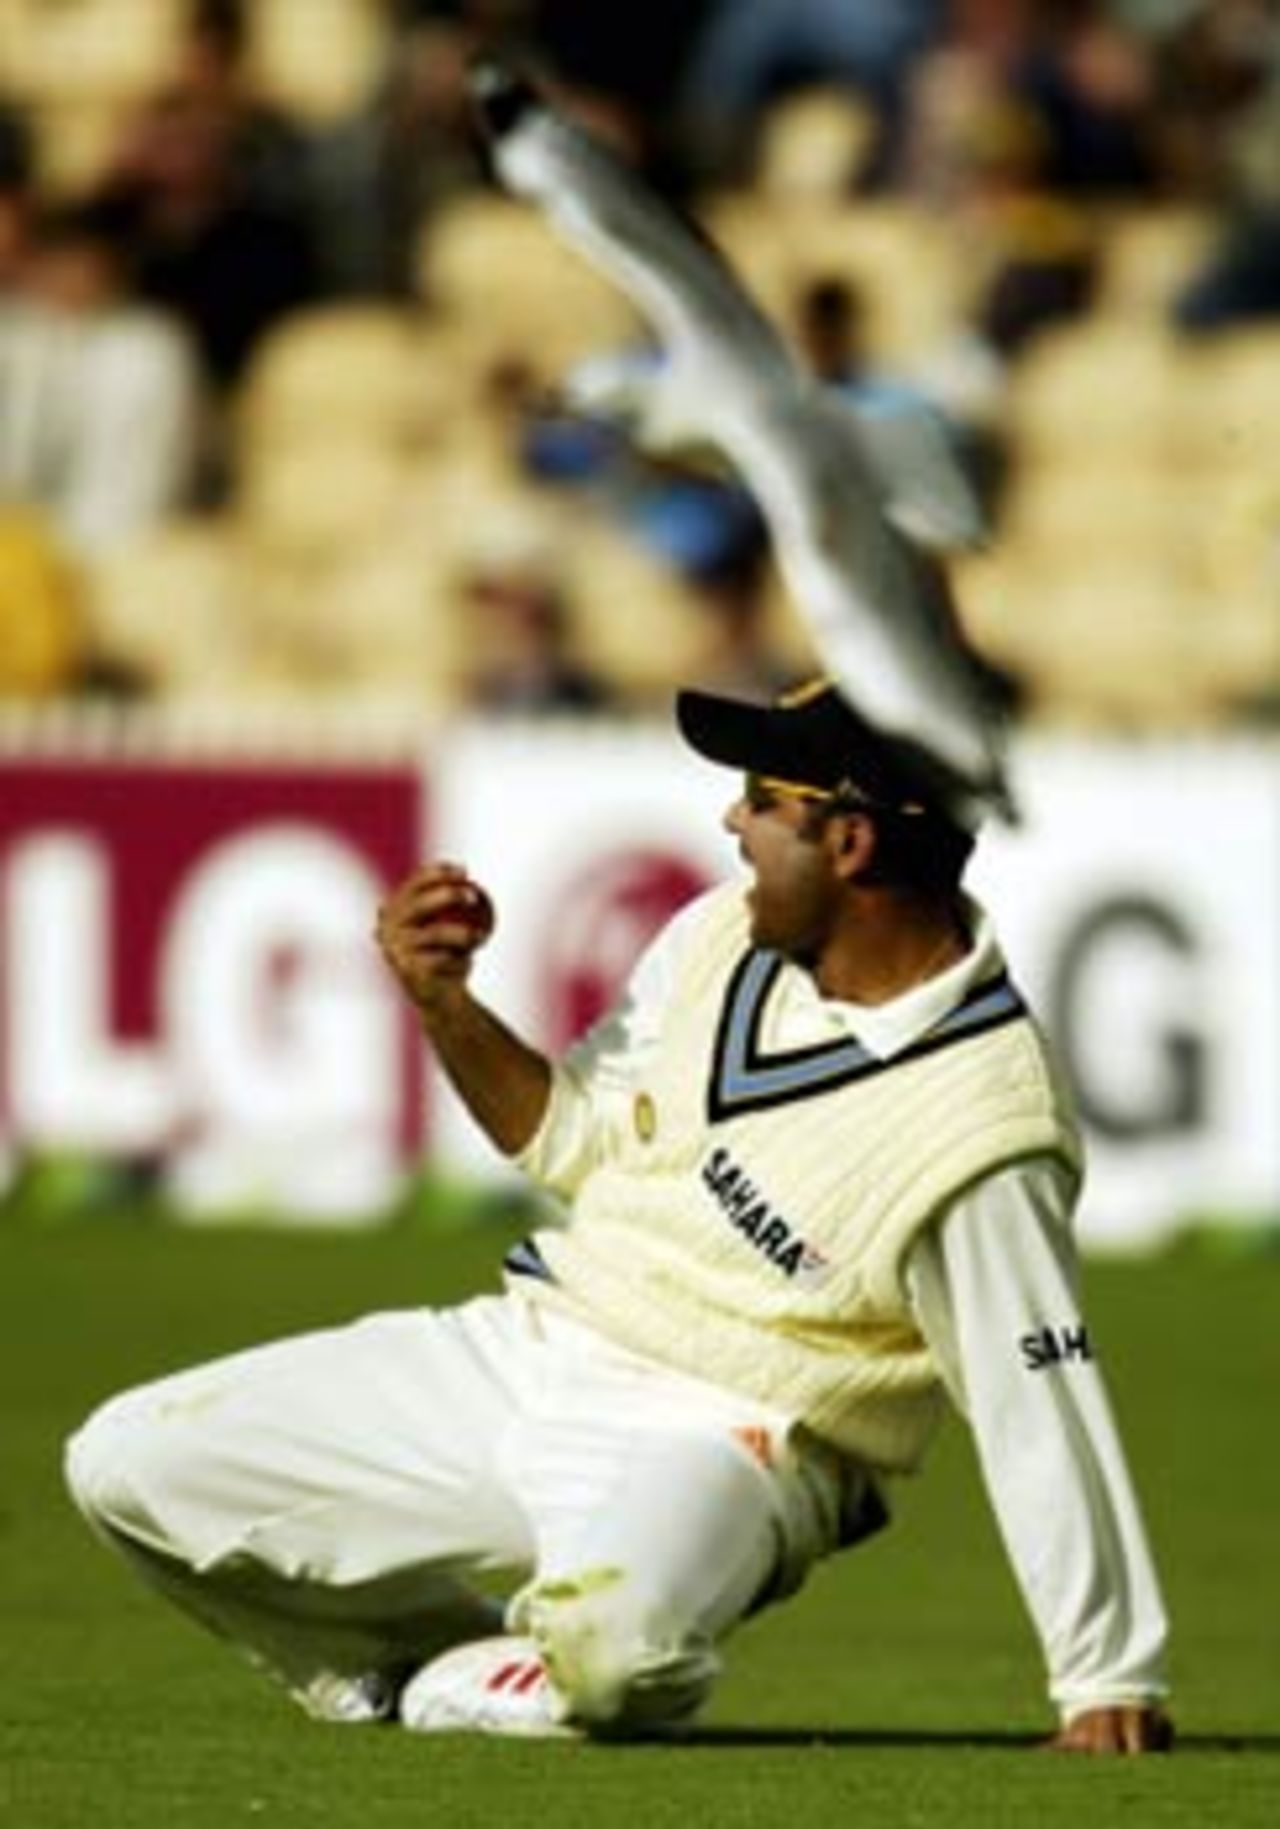 Sehwag's diving catch to remove Katich brought some joy to the Indians, Australia v India, 2nd Test, Adelaide, 1st day, December 12, 2003